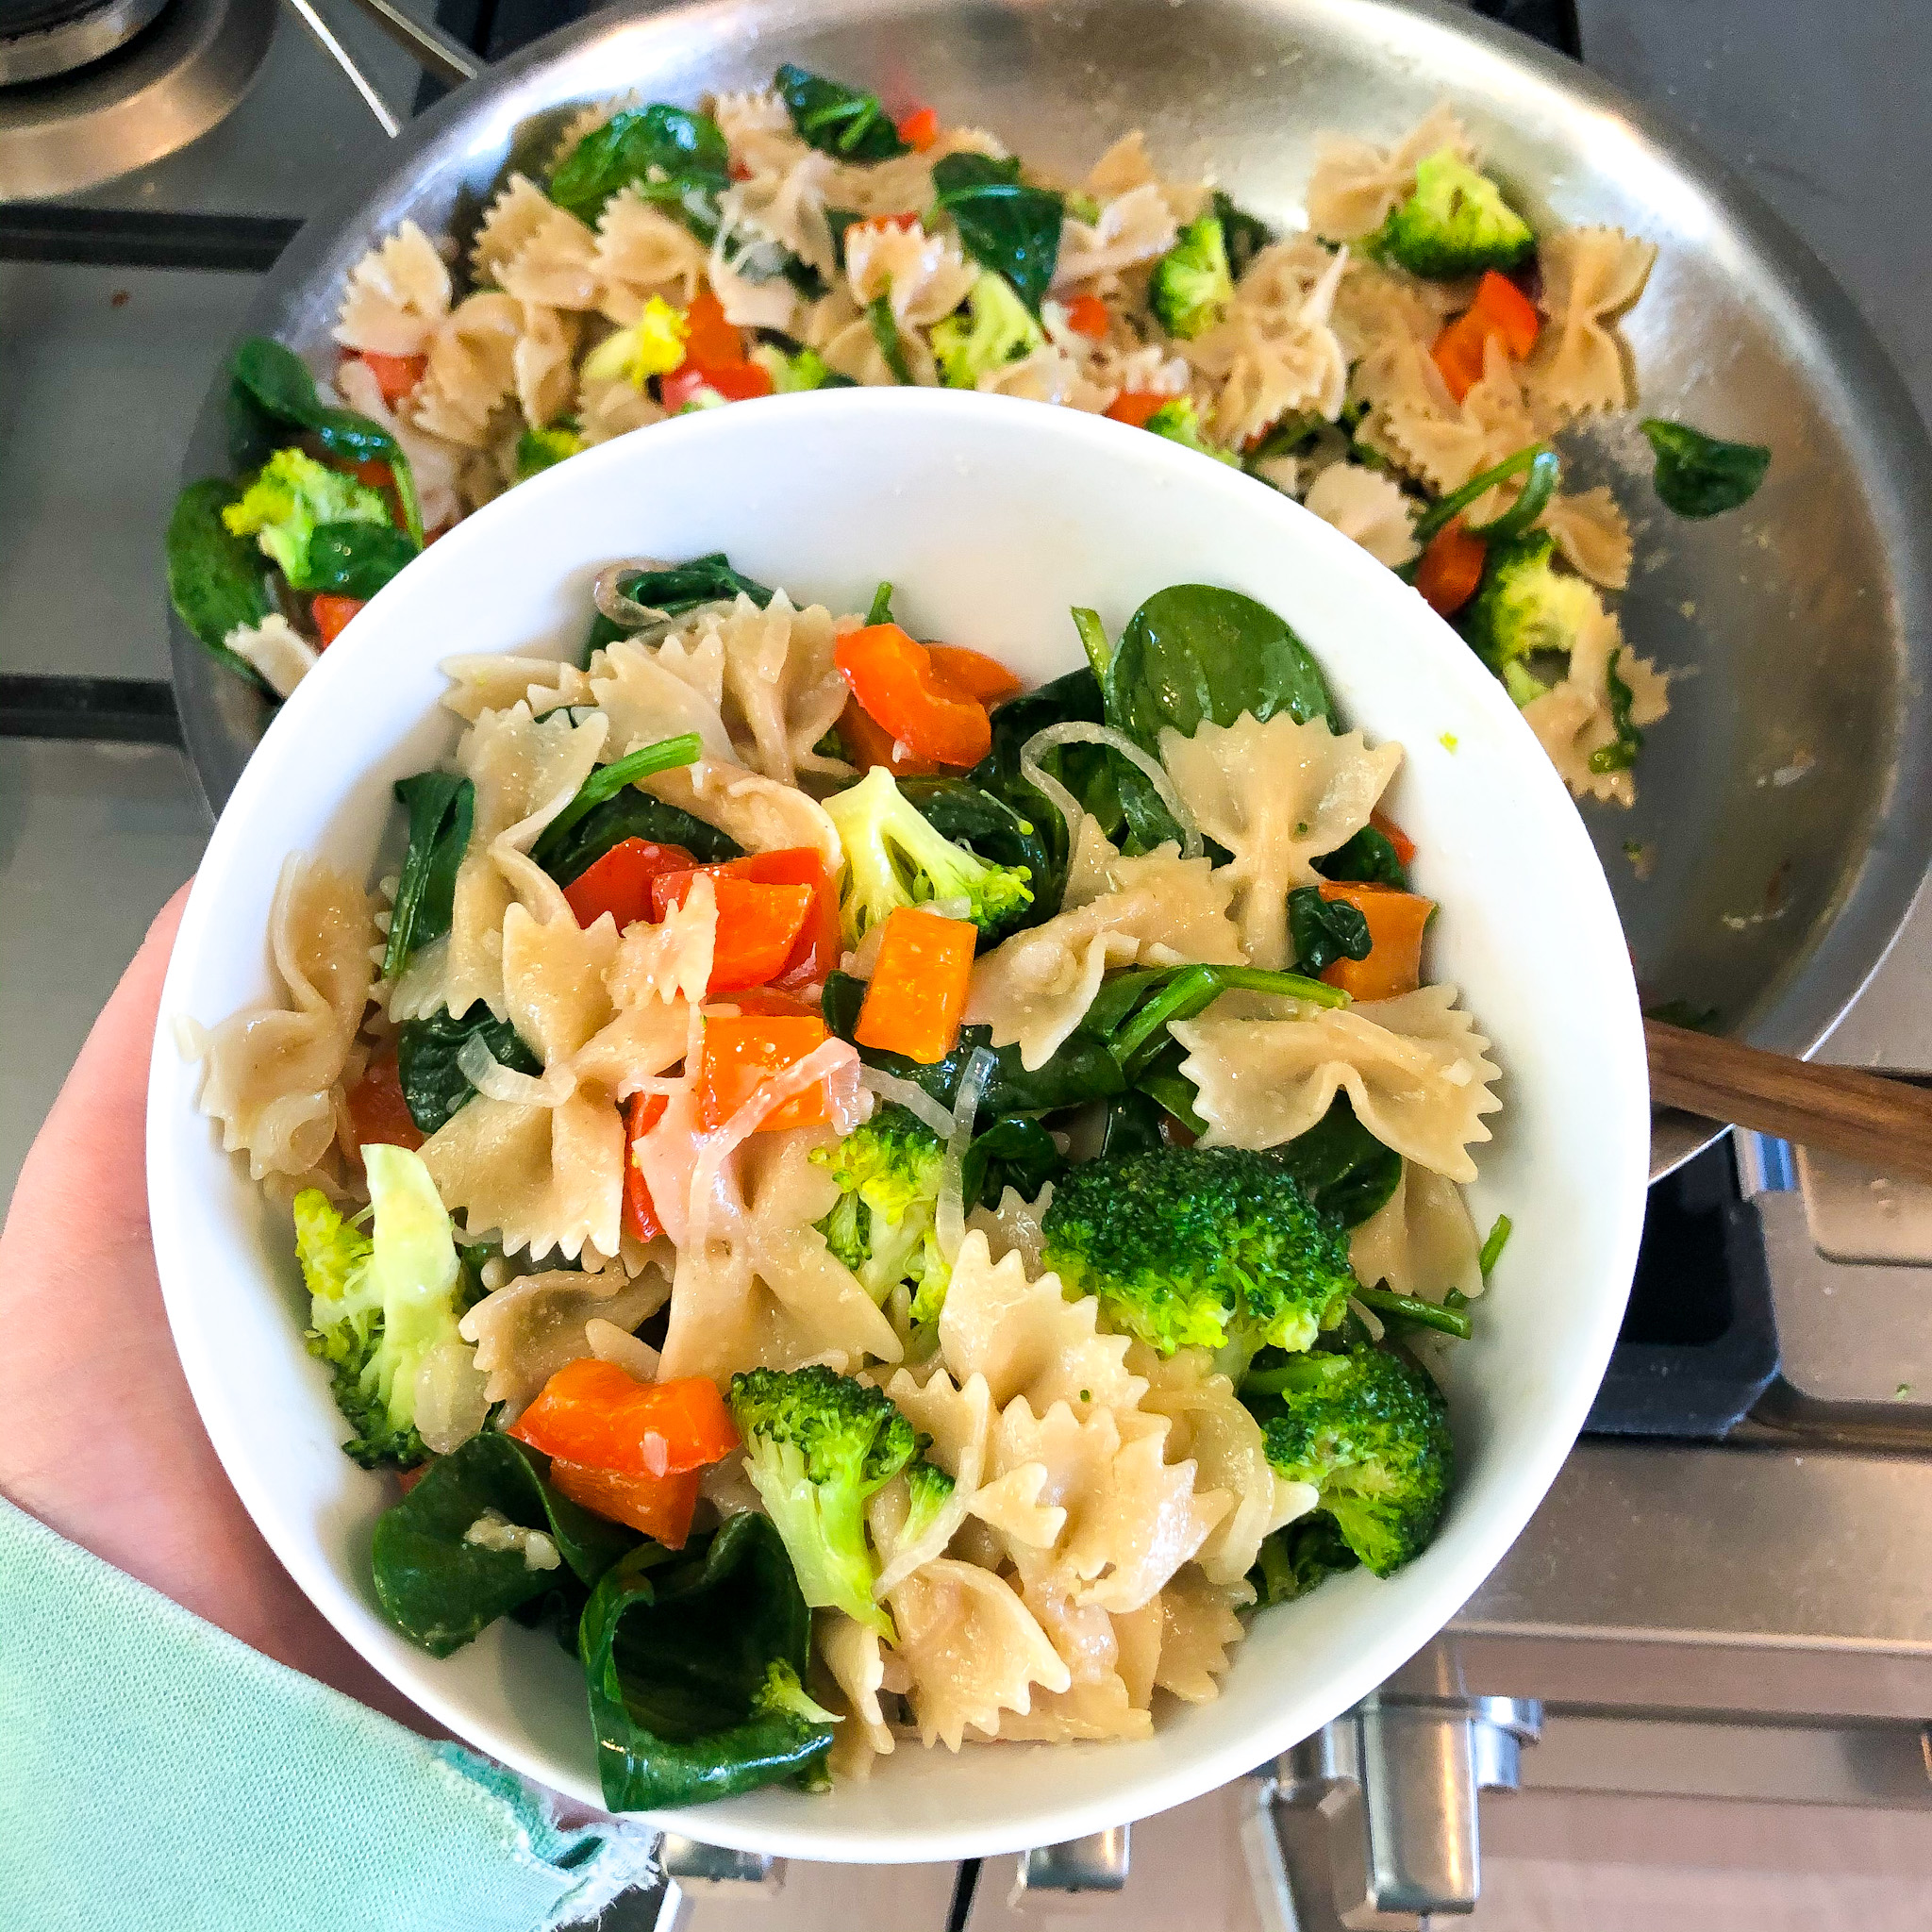 the finished quick and easy gluten free veggie pasta dish